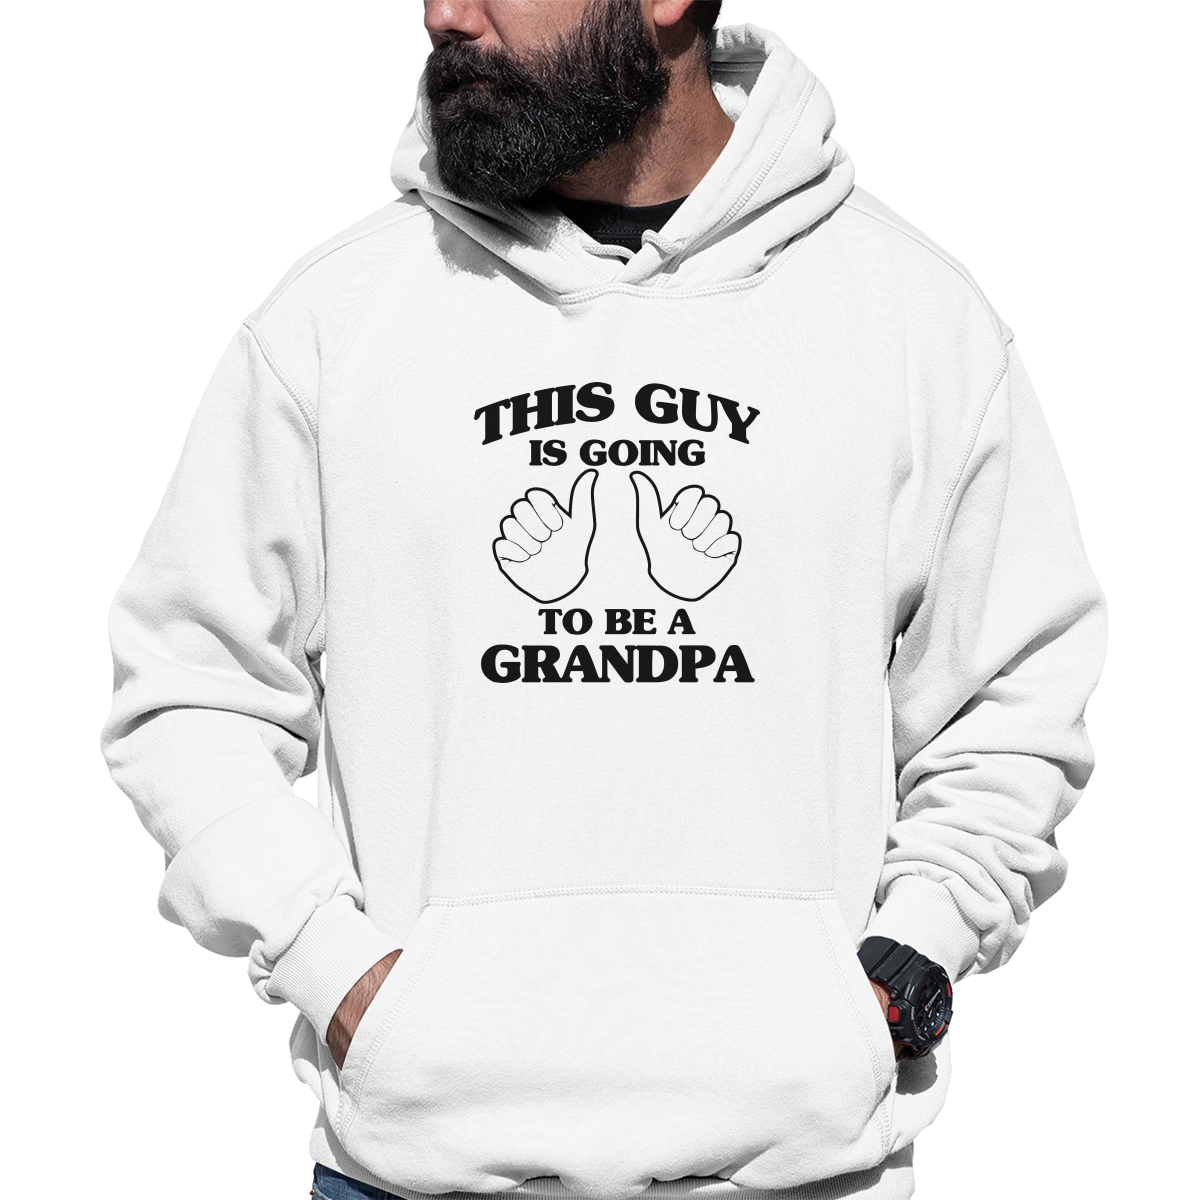 This Guy Is Going To Be A Grandpa Unisex Hoodie | White